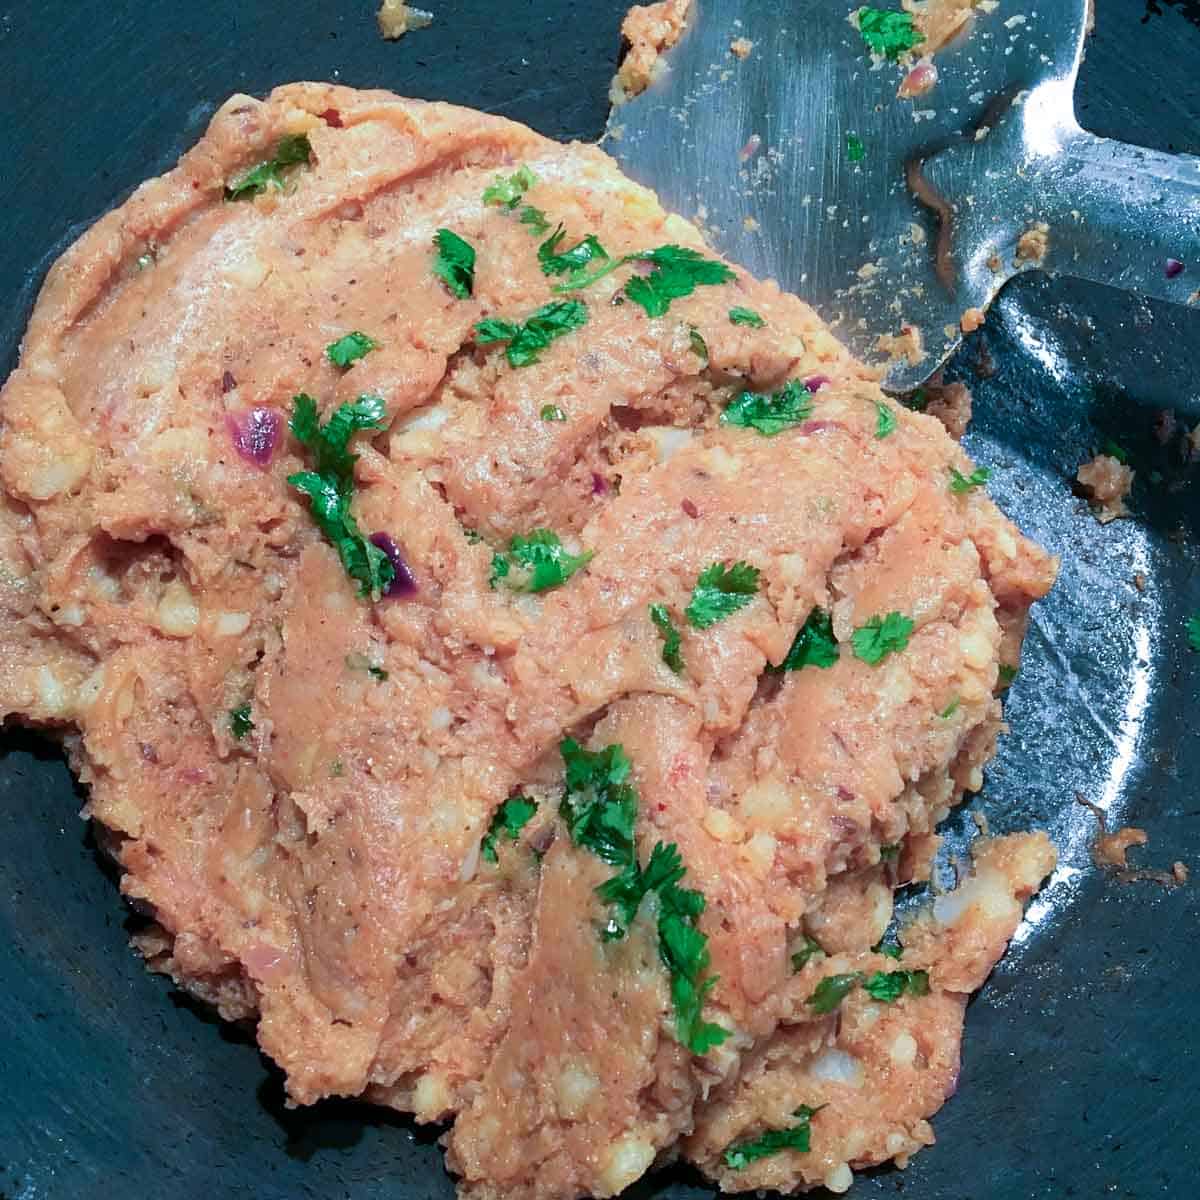 Step showing the addition of potatoe and spices to make the paratha filling.